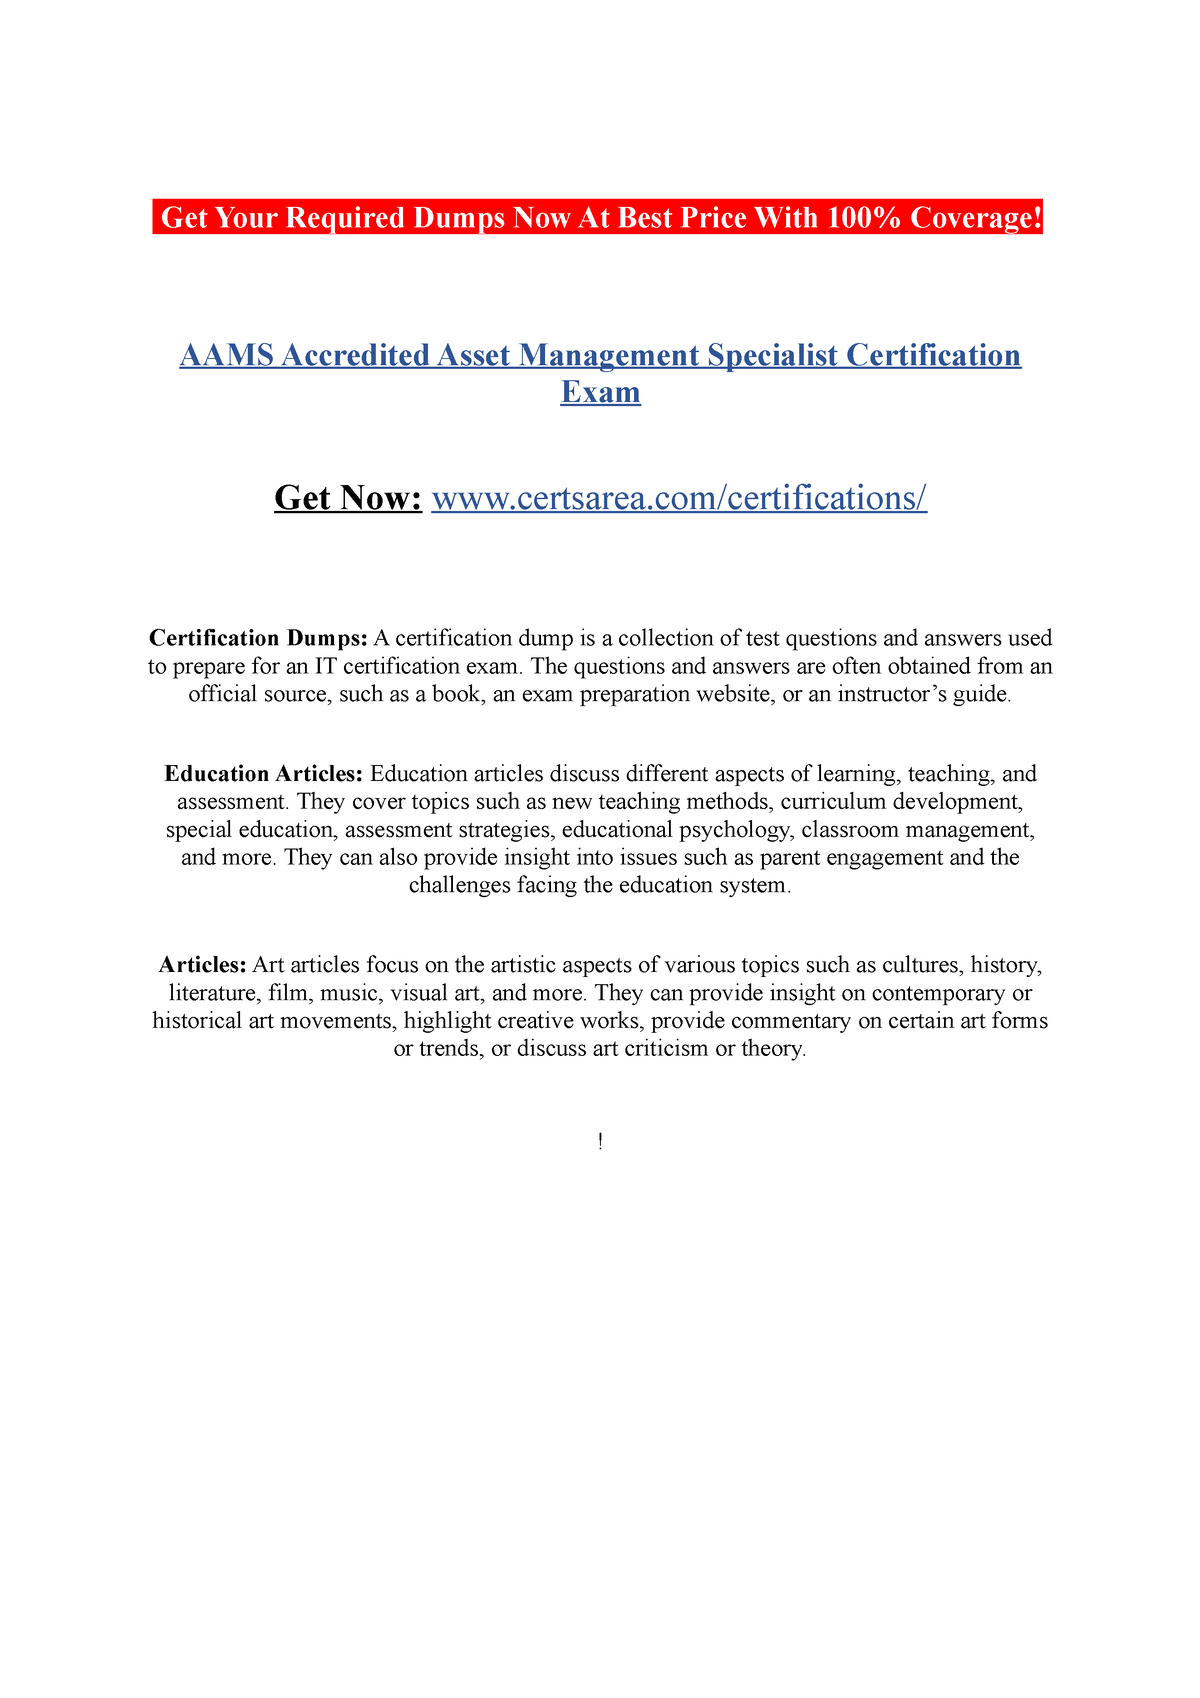 AAMS Accredited Asset Management Specialist Certification Exam Get